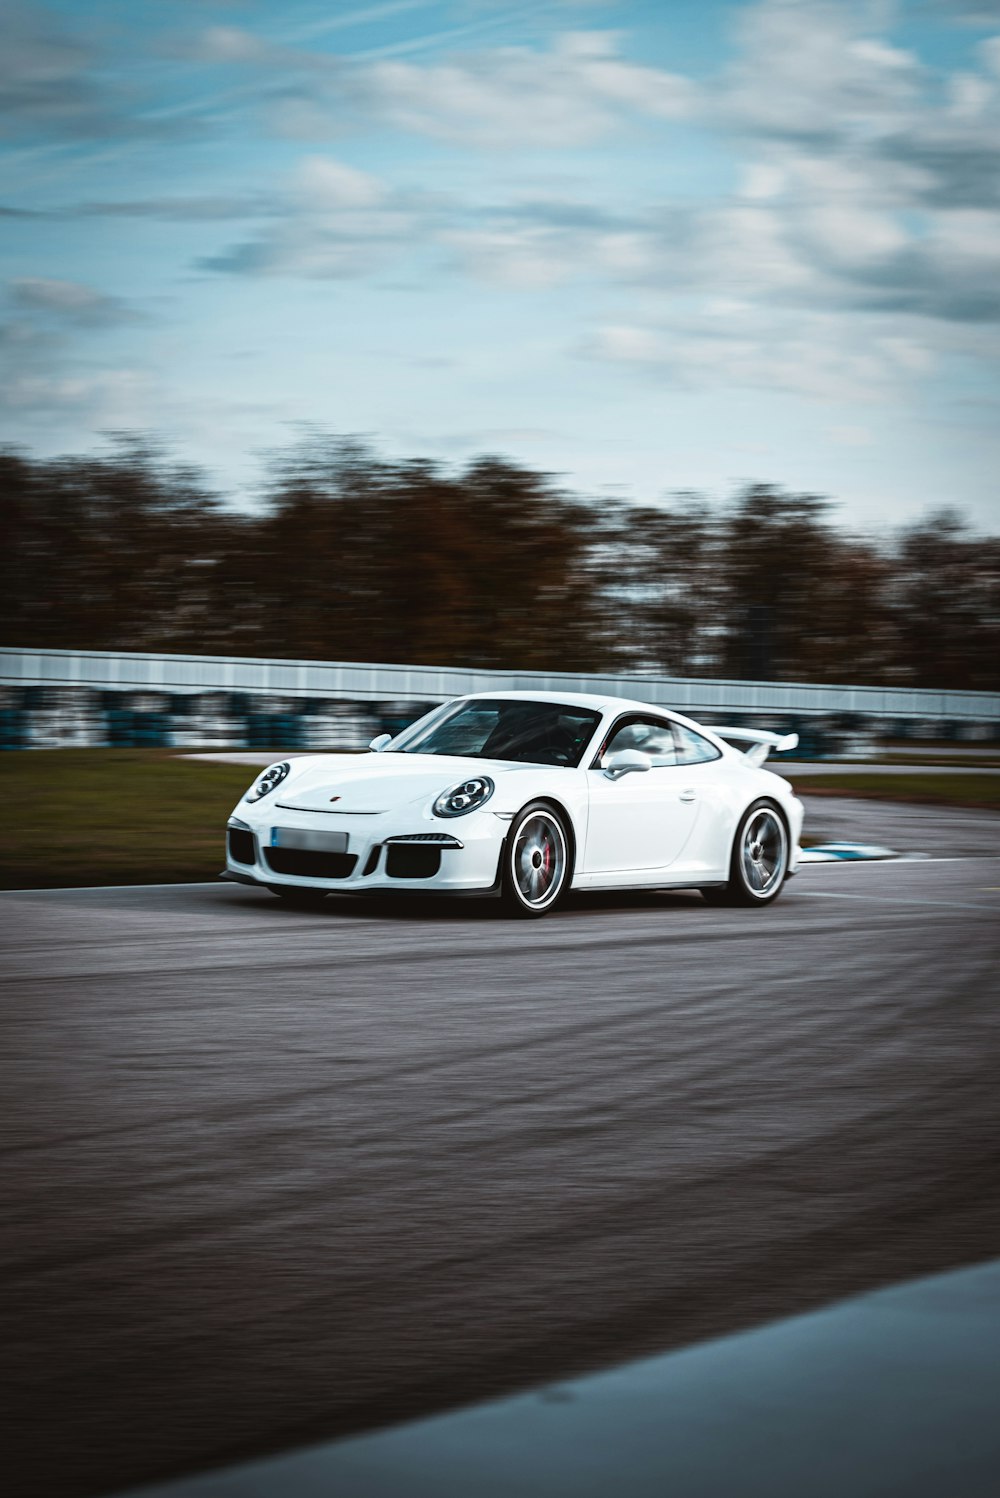 a white sports car on a race track